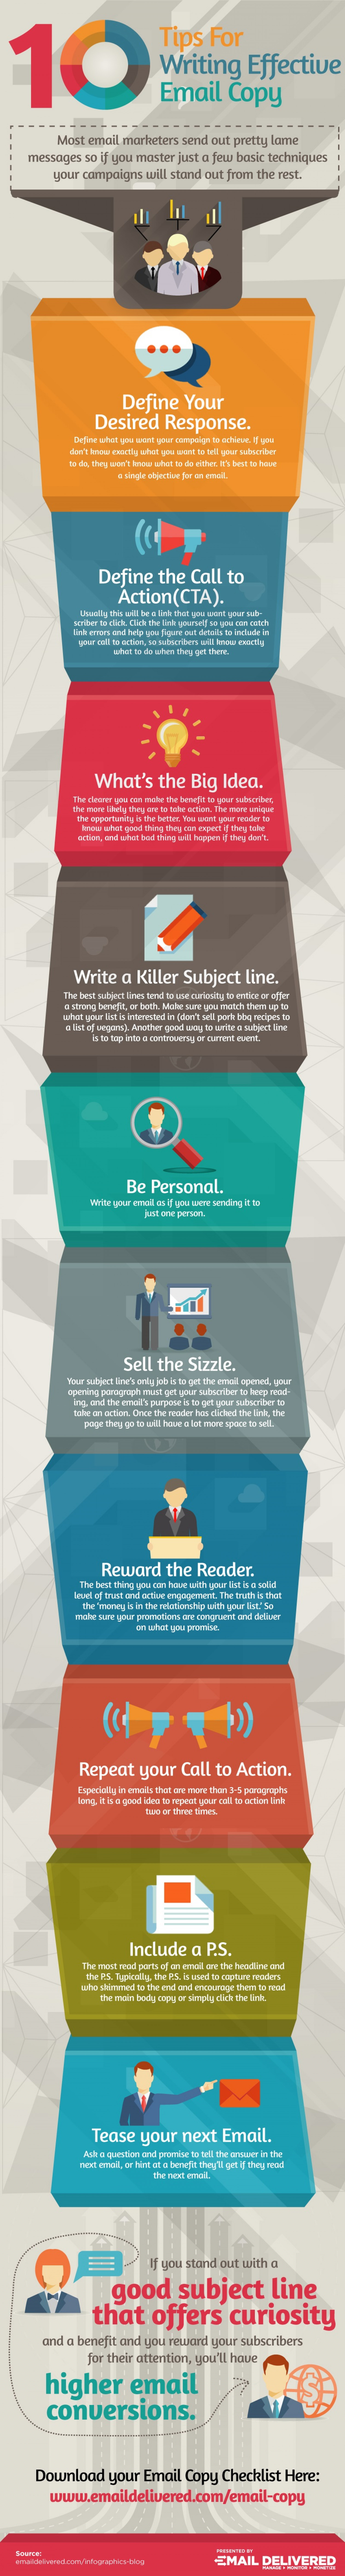 10 Tips for Writing Effective Email Copy-Infographic Infographic